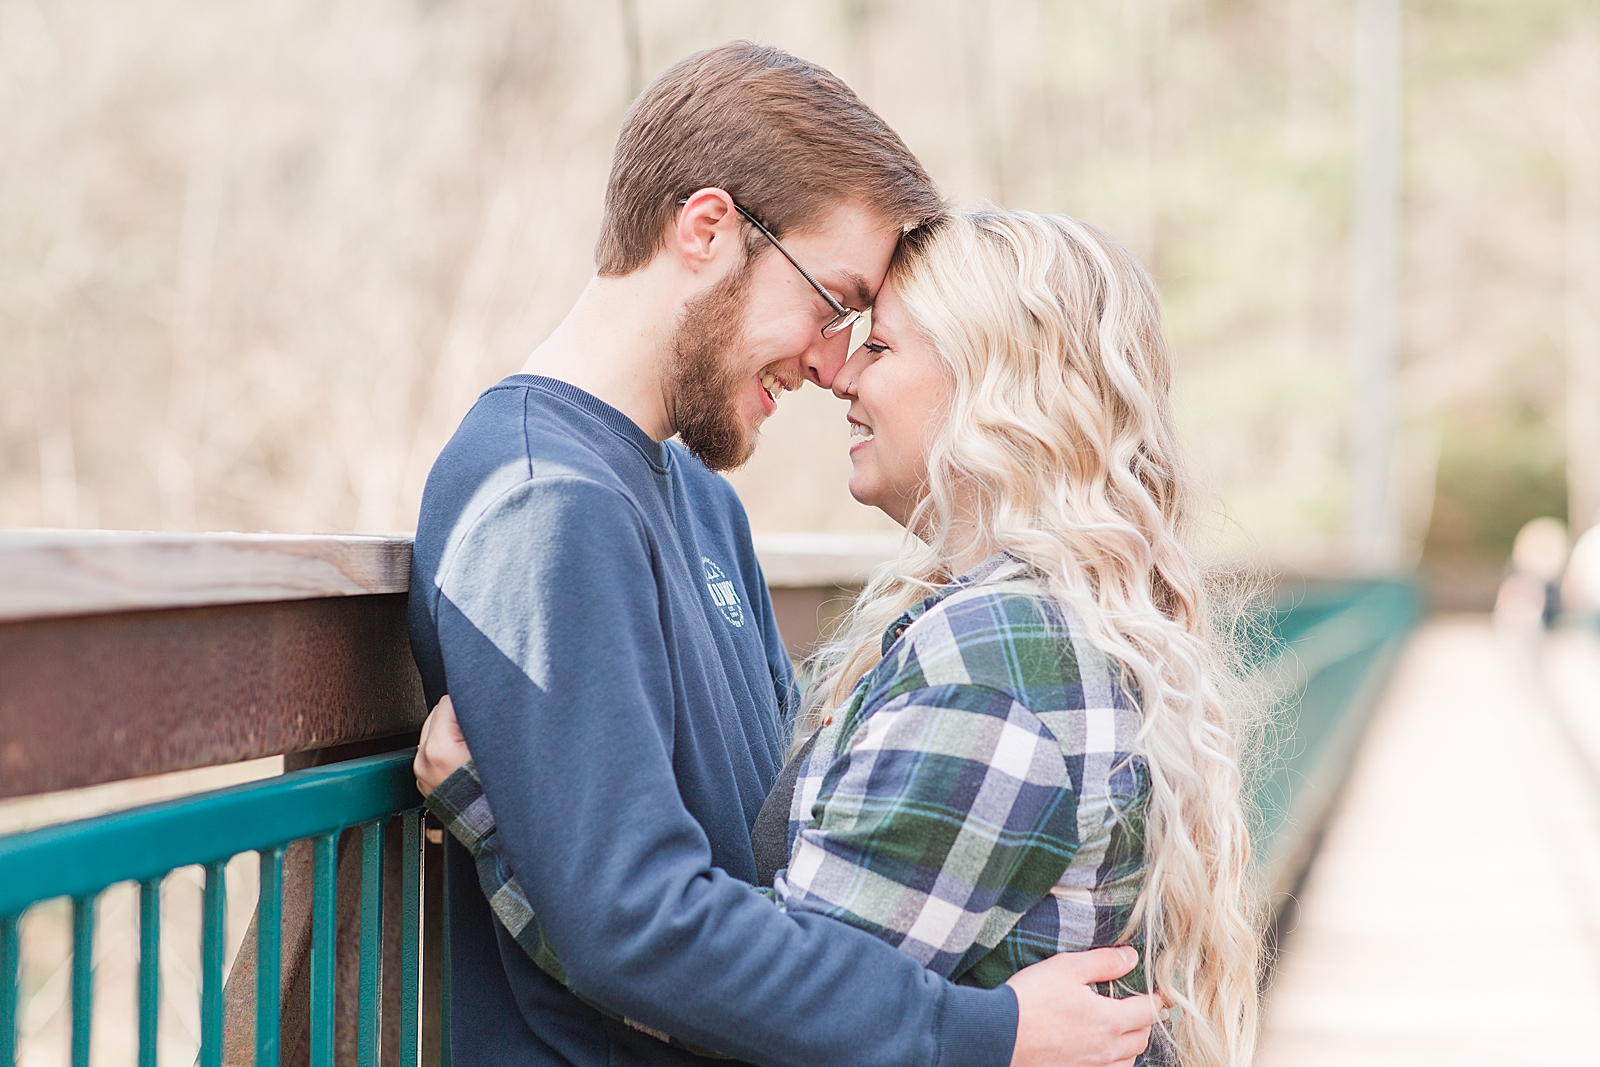 Ocoee River Engagement Session Cody and Haley nose to nose on bridge Photo